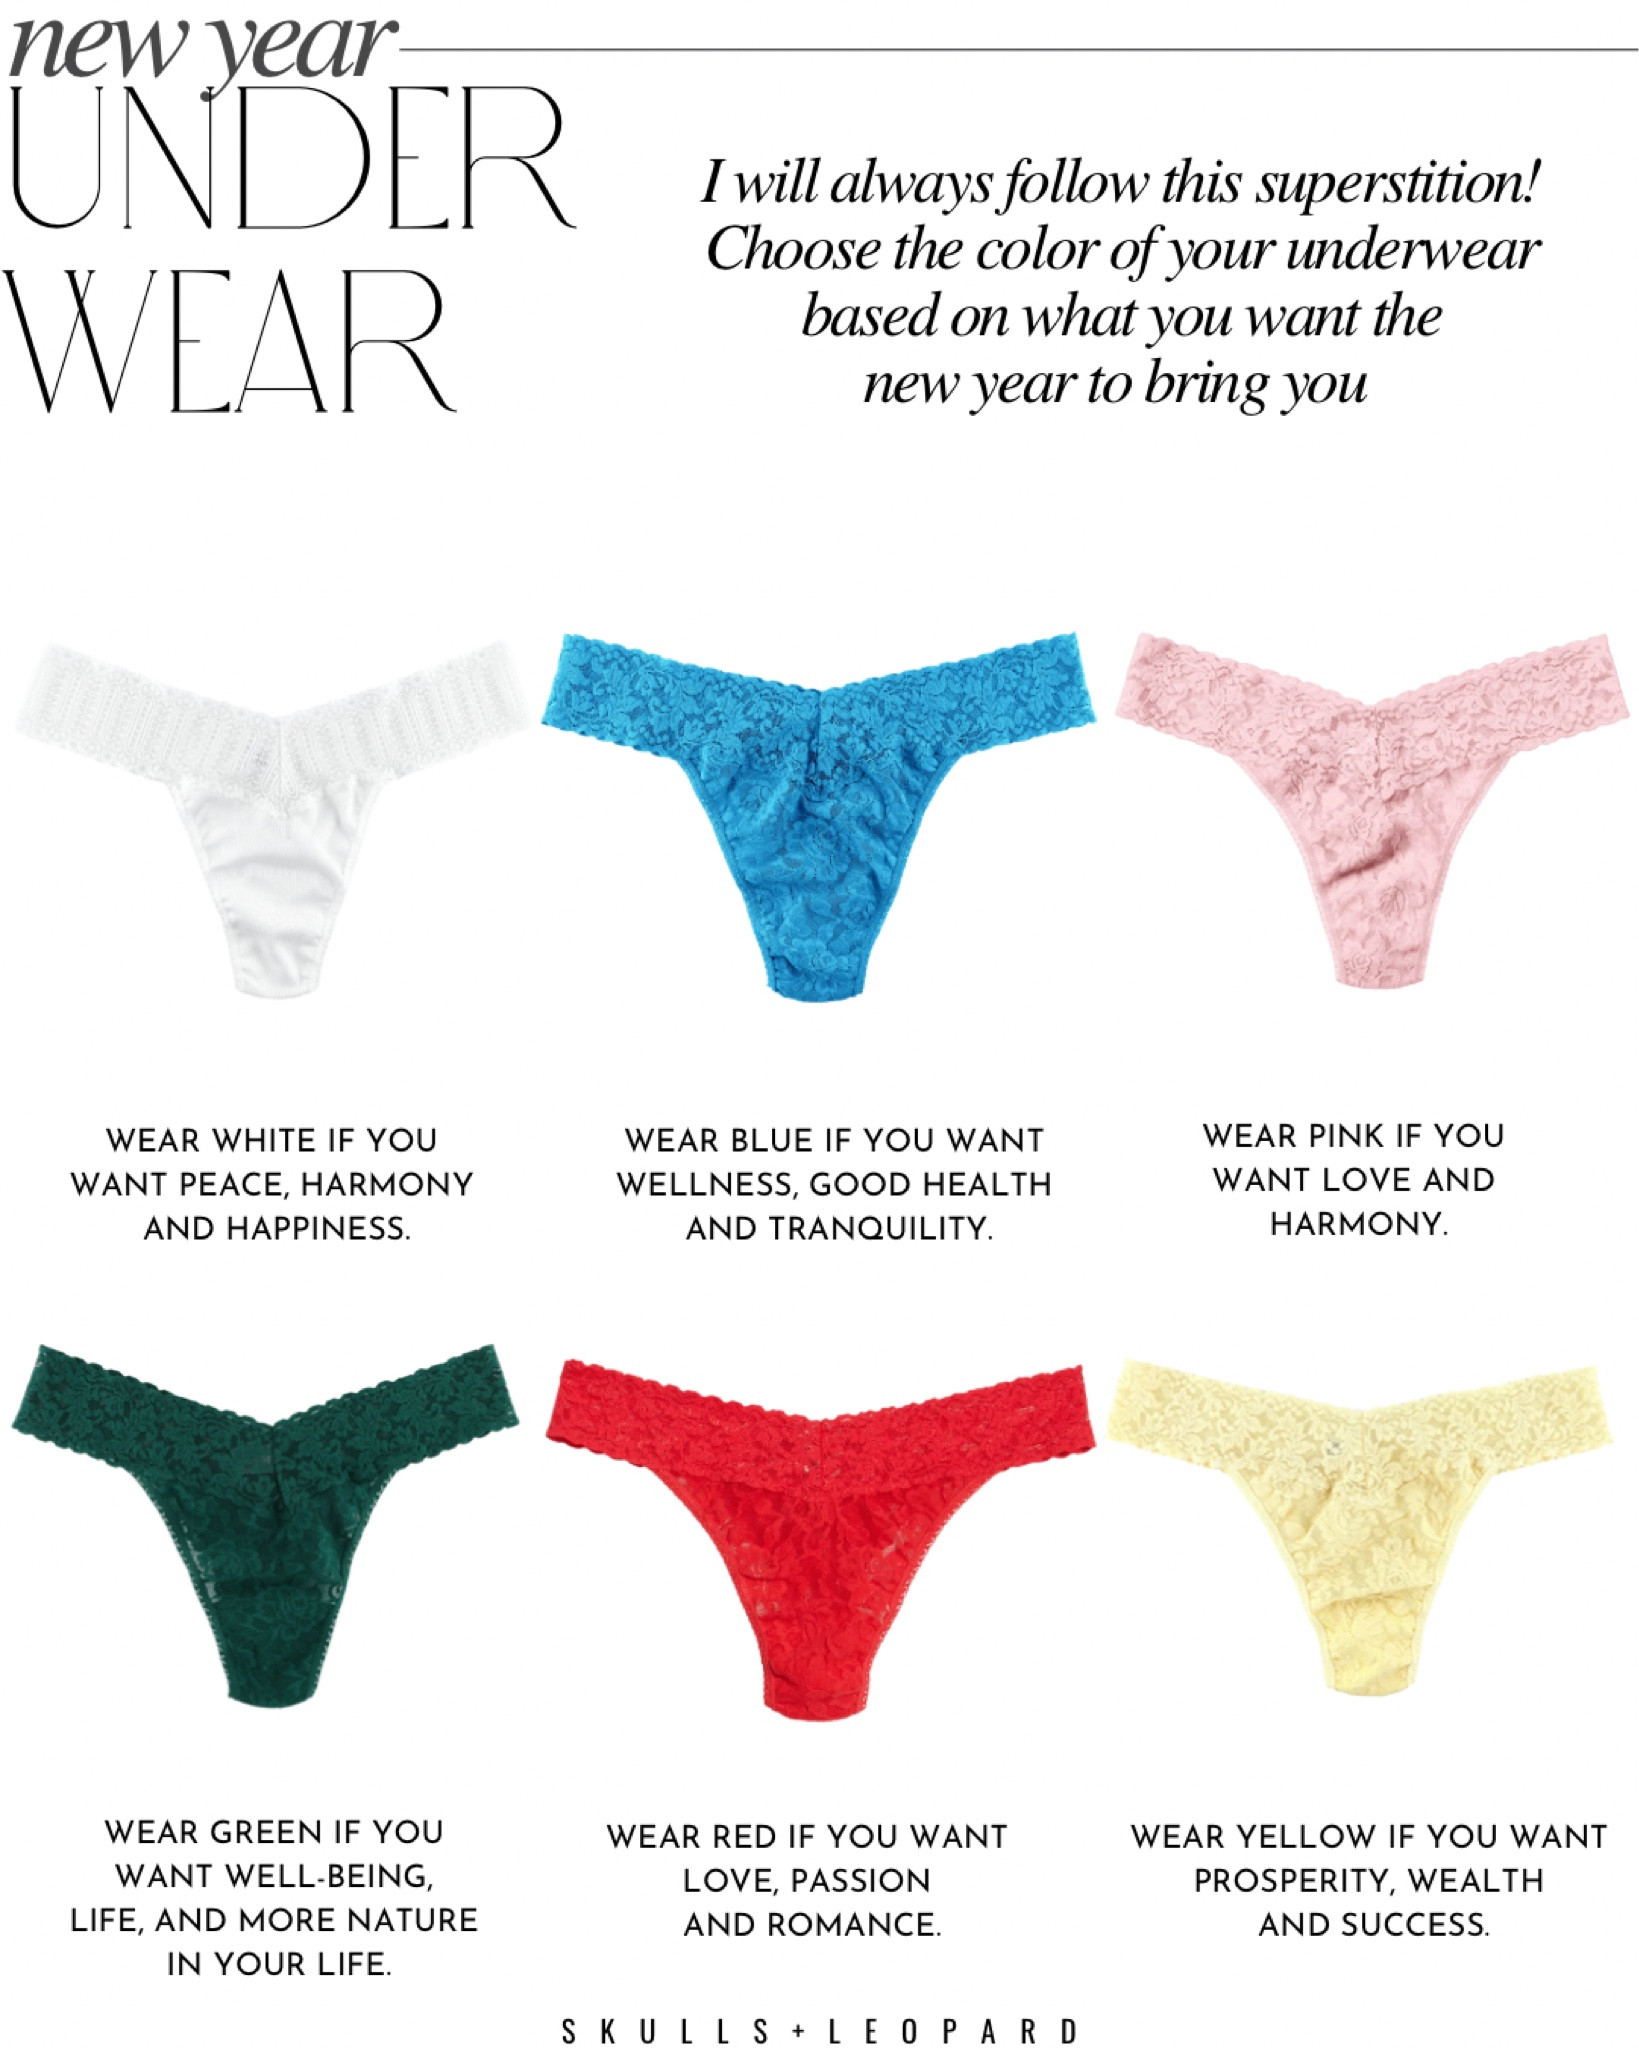 Dont forget the little piece of paper in your underwear ;) #newyearse, pink under new years